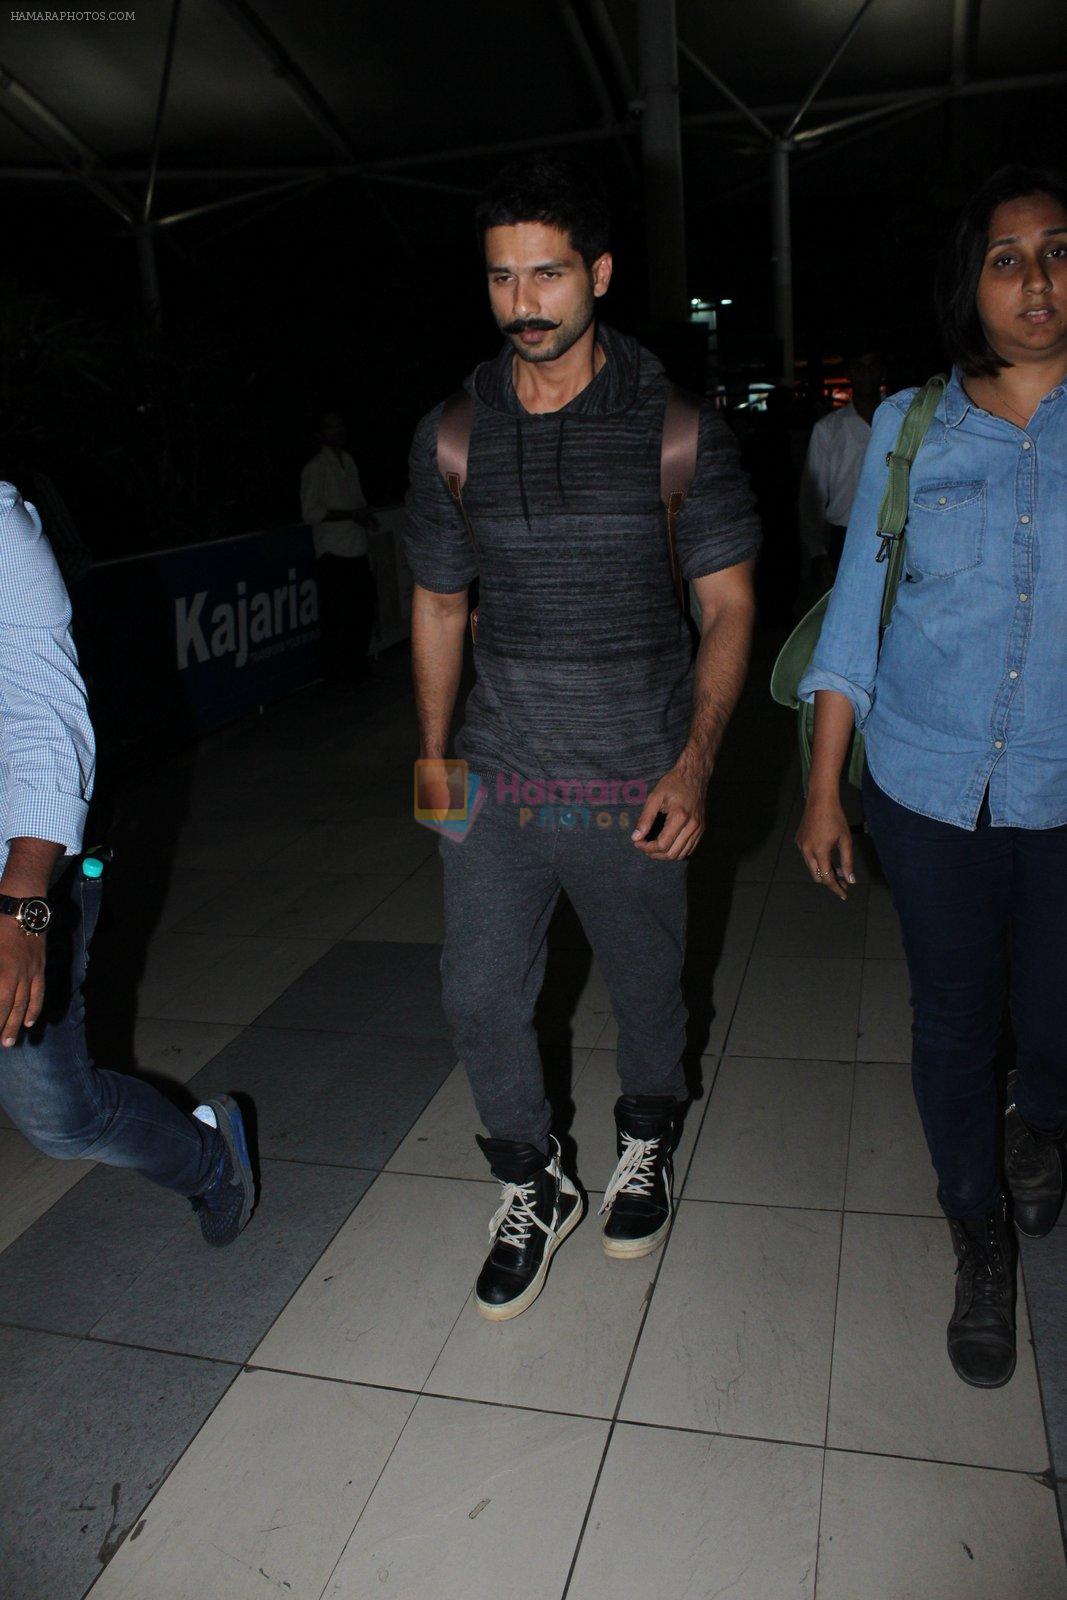 Shahid Kapoor snapped at airport on 21st March 2016